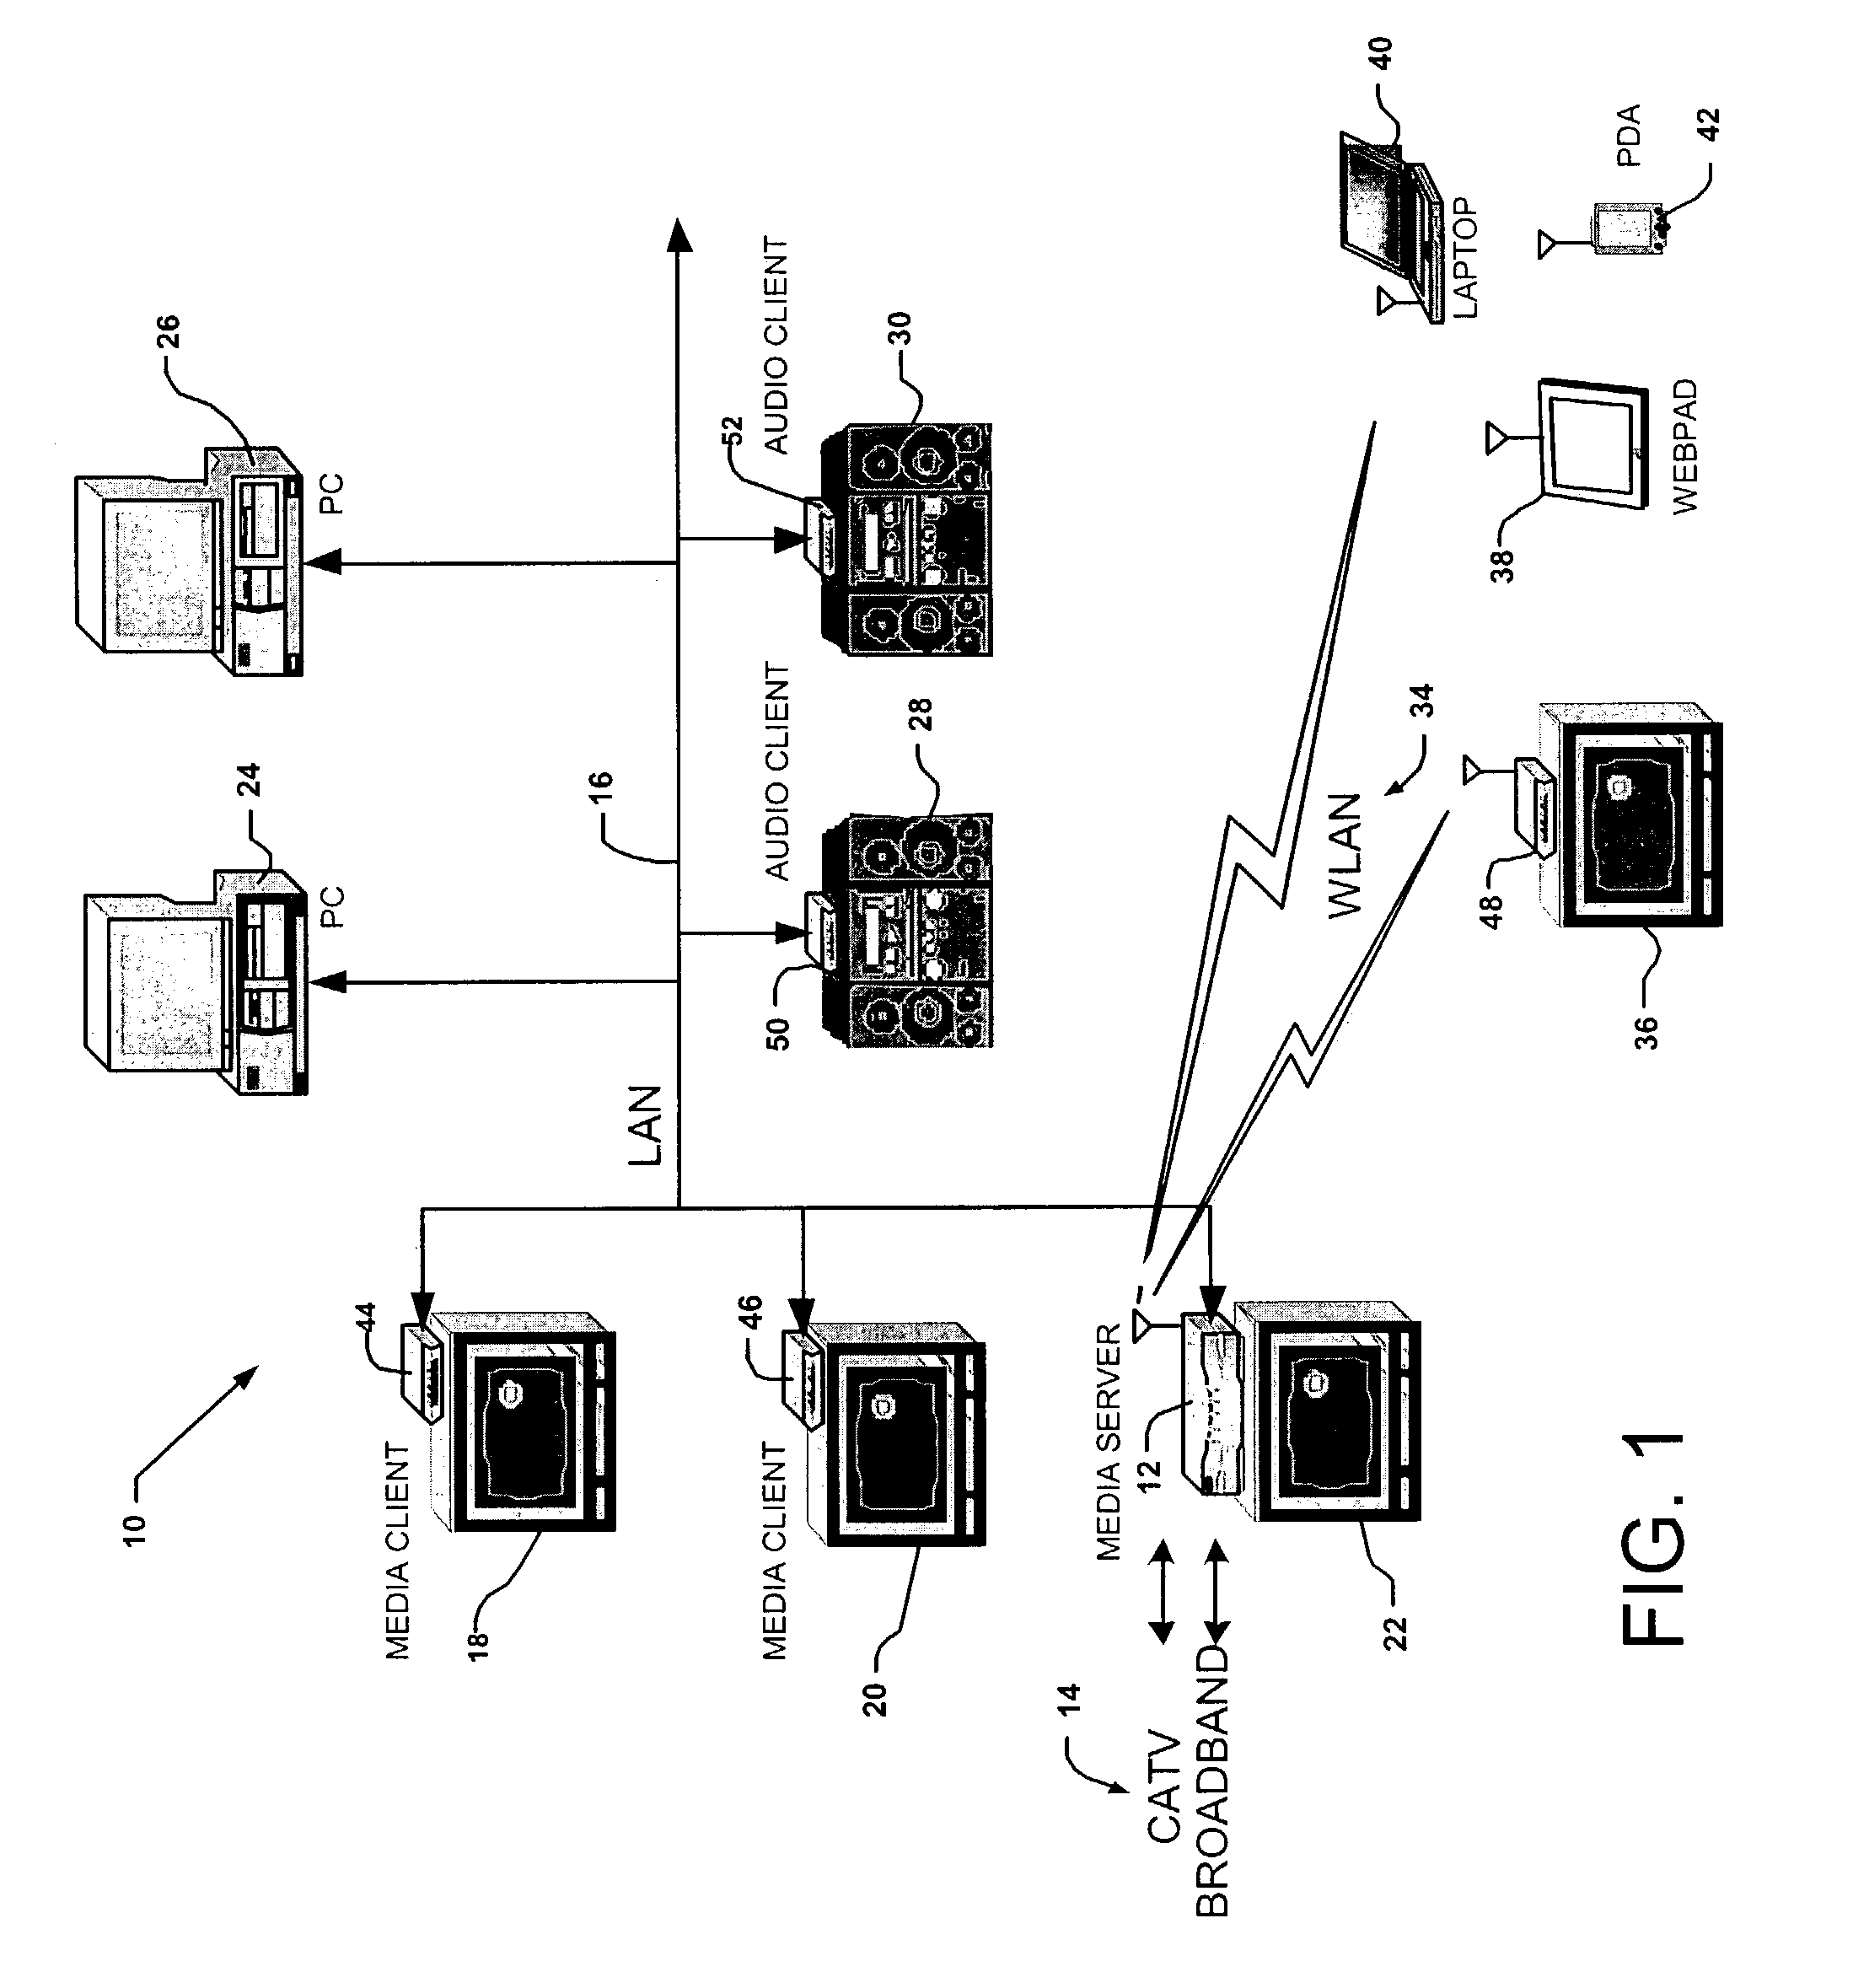 Networked digital video recording system with copy protection and random access playback